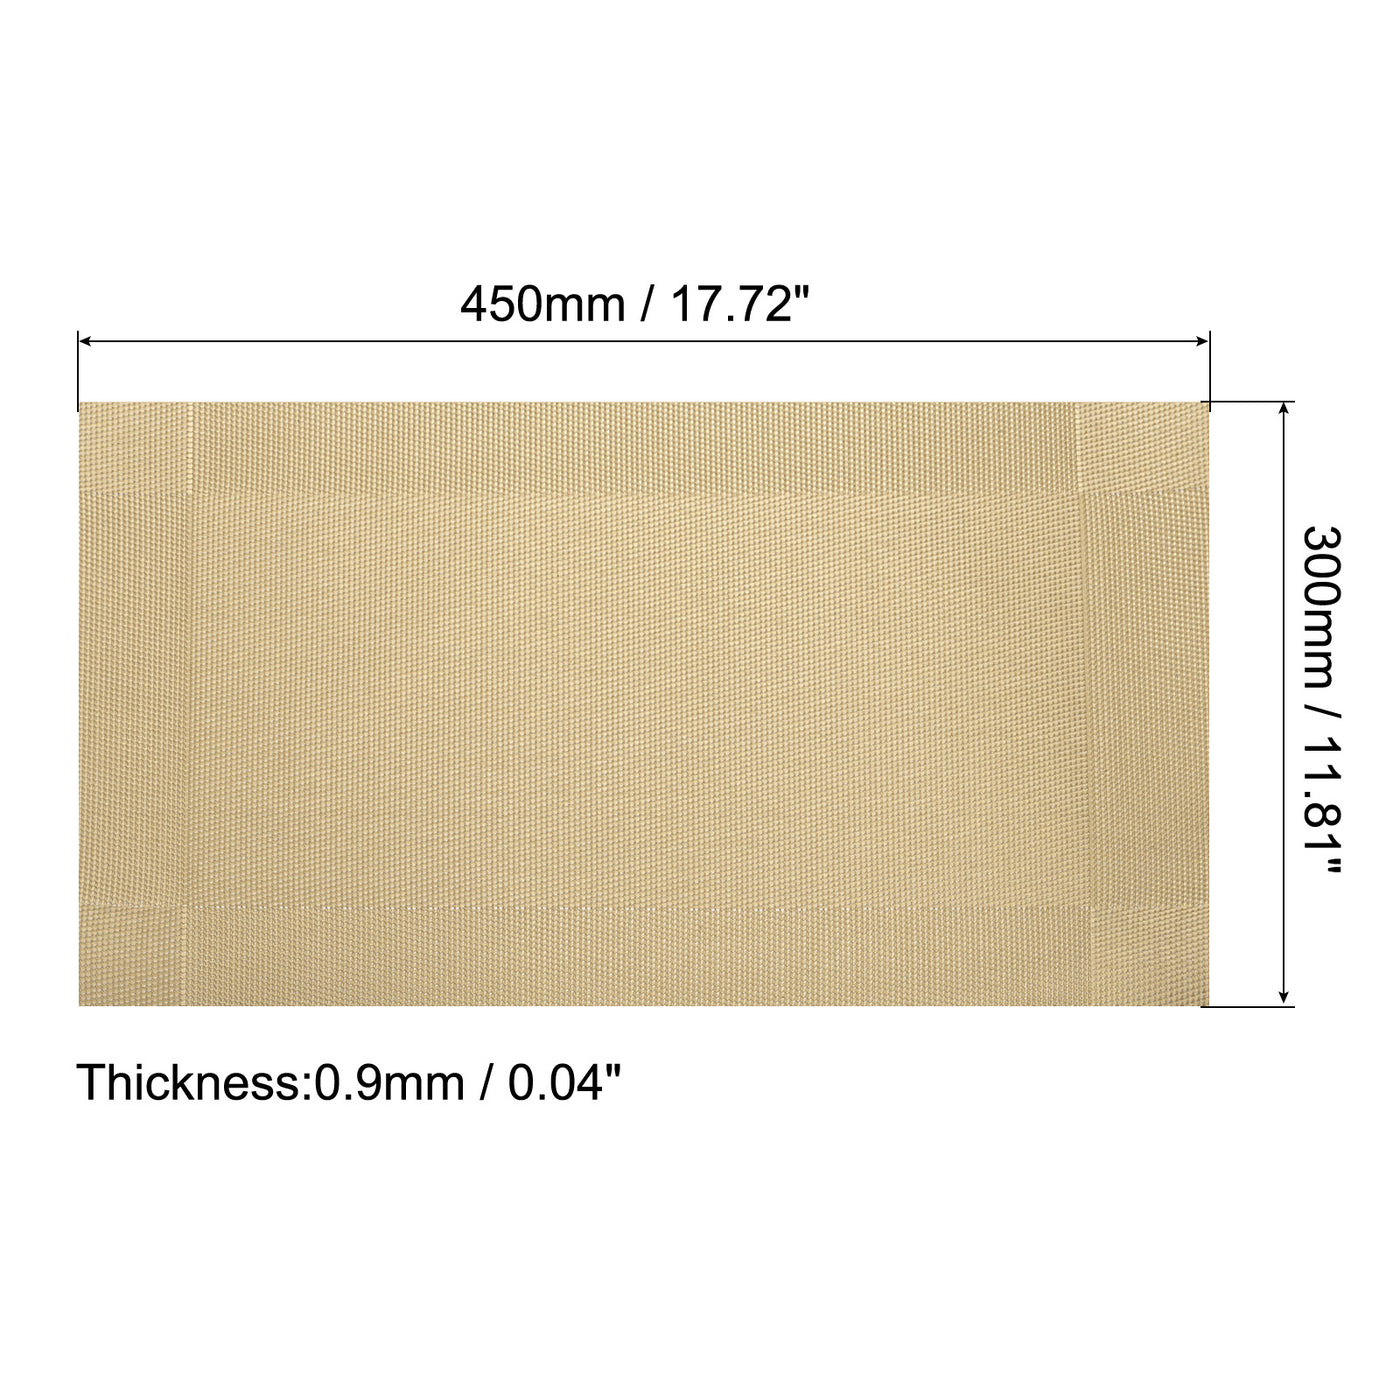 uxcell Uxcell Place Mats 450x300mm 8pcs PVC Table Washable Woven Placemat, Gold Tone